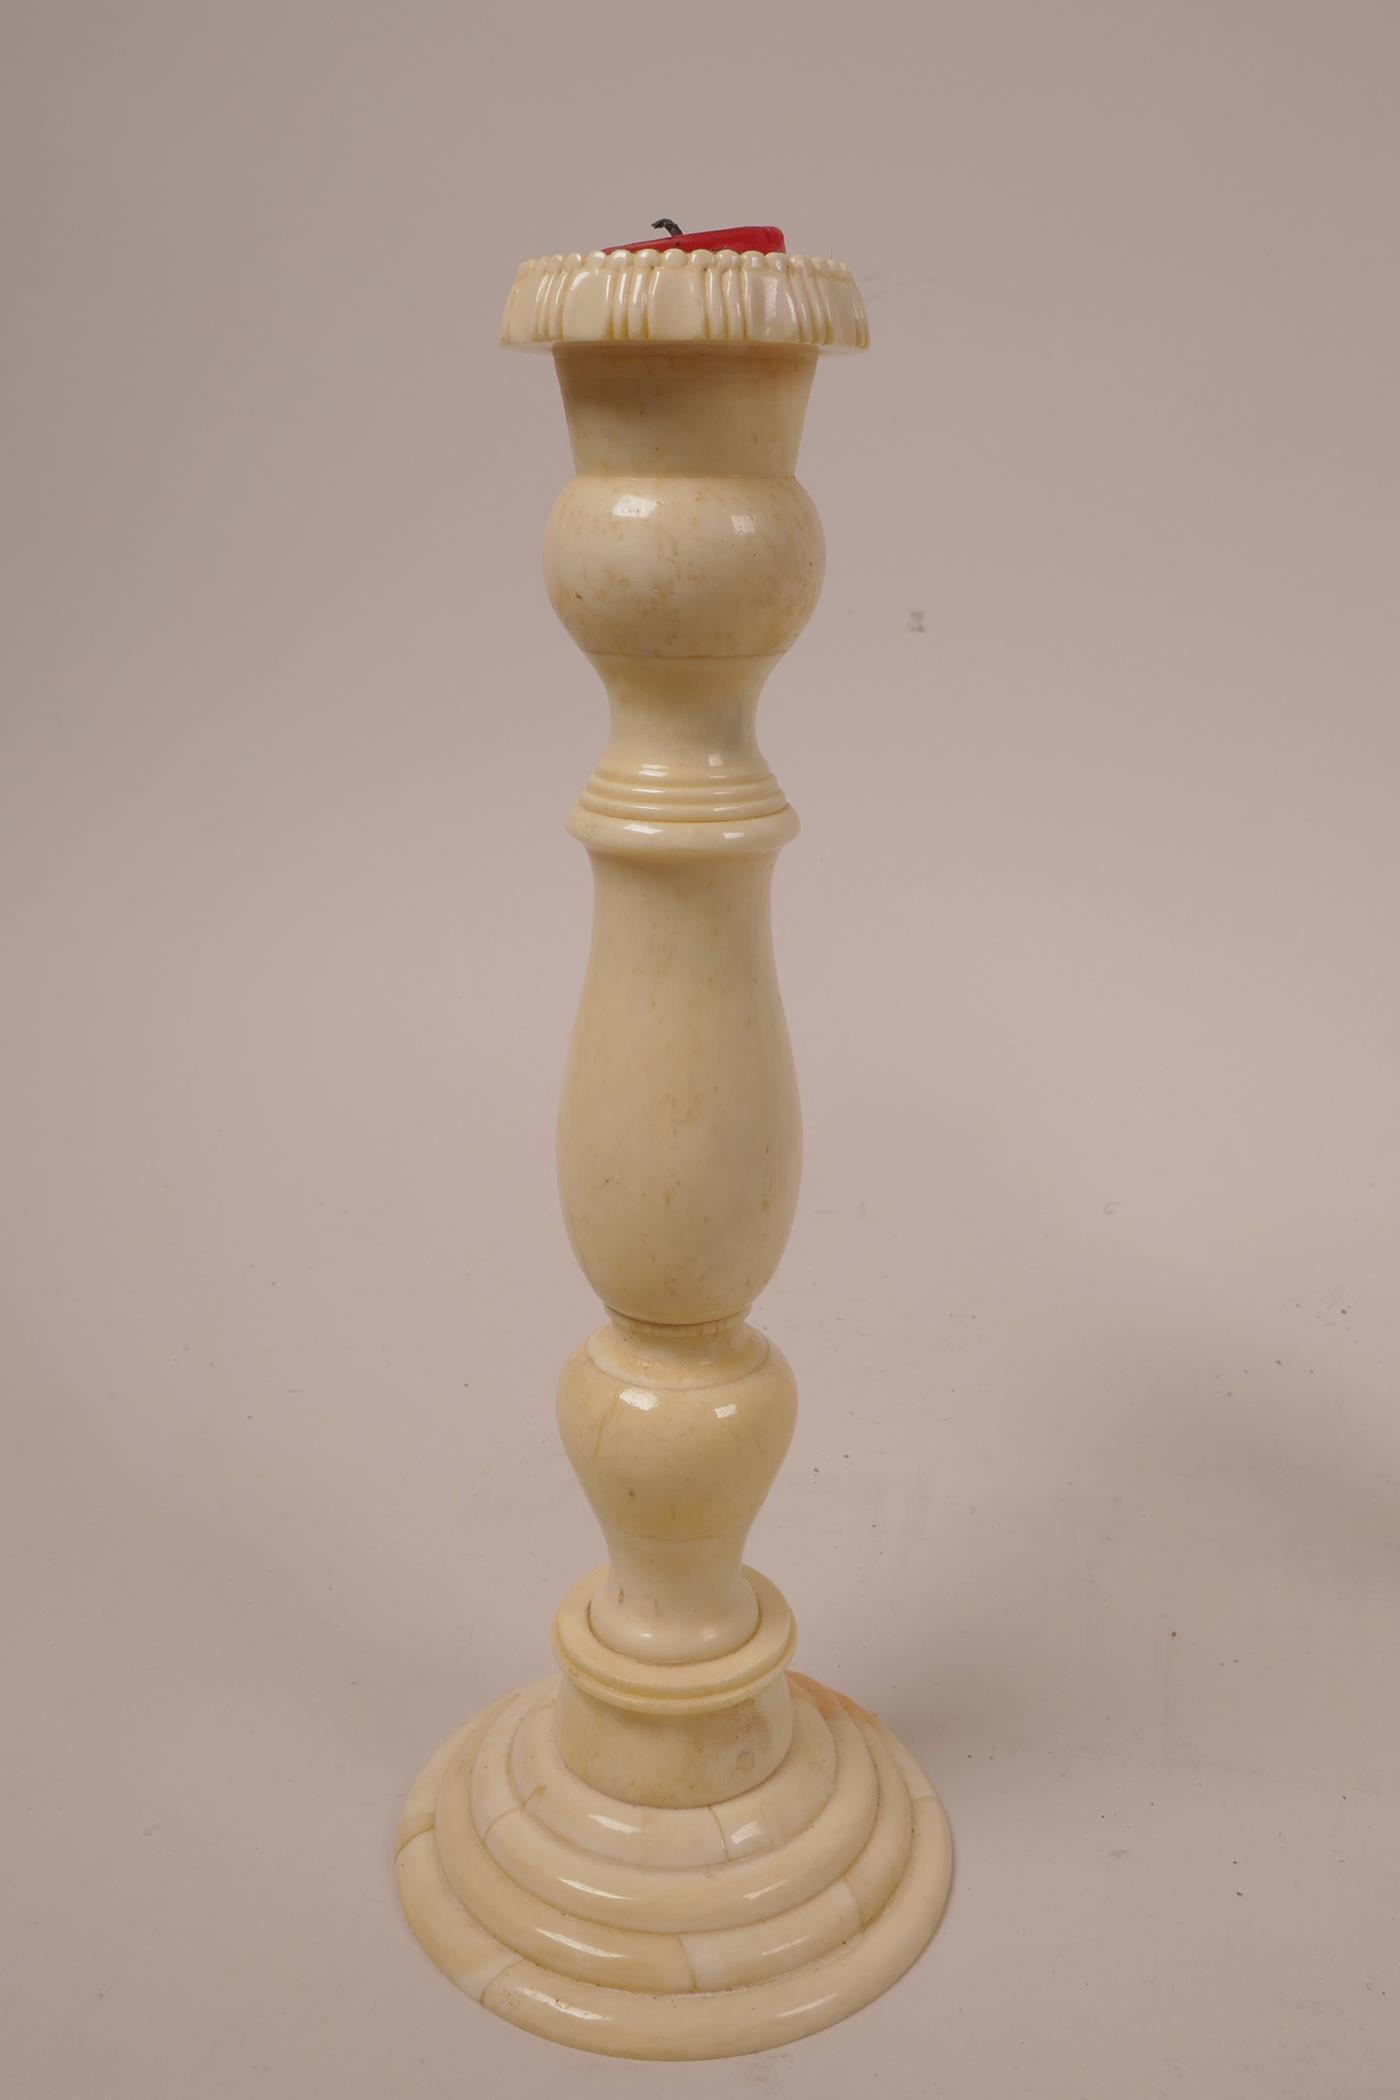 A pair of C19th bone candlesticks with turned columns, 8" high x 3" wide - Image 2 of 5